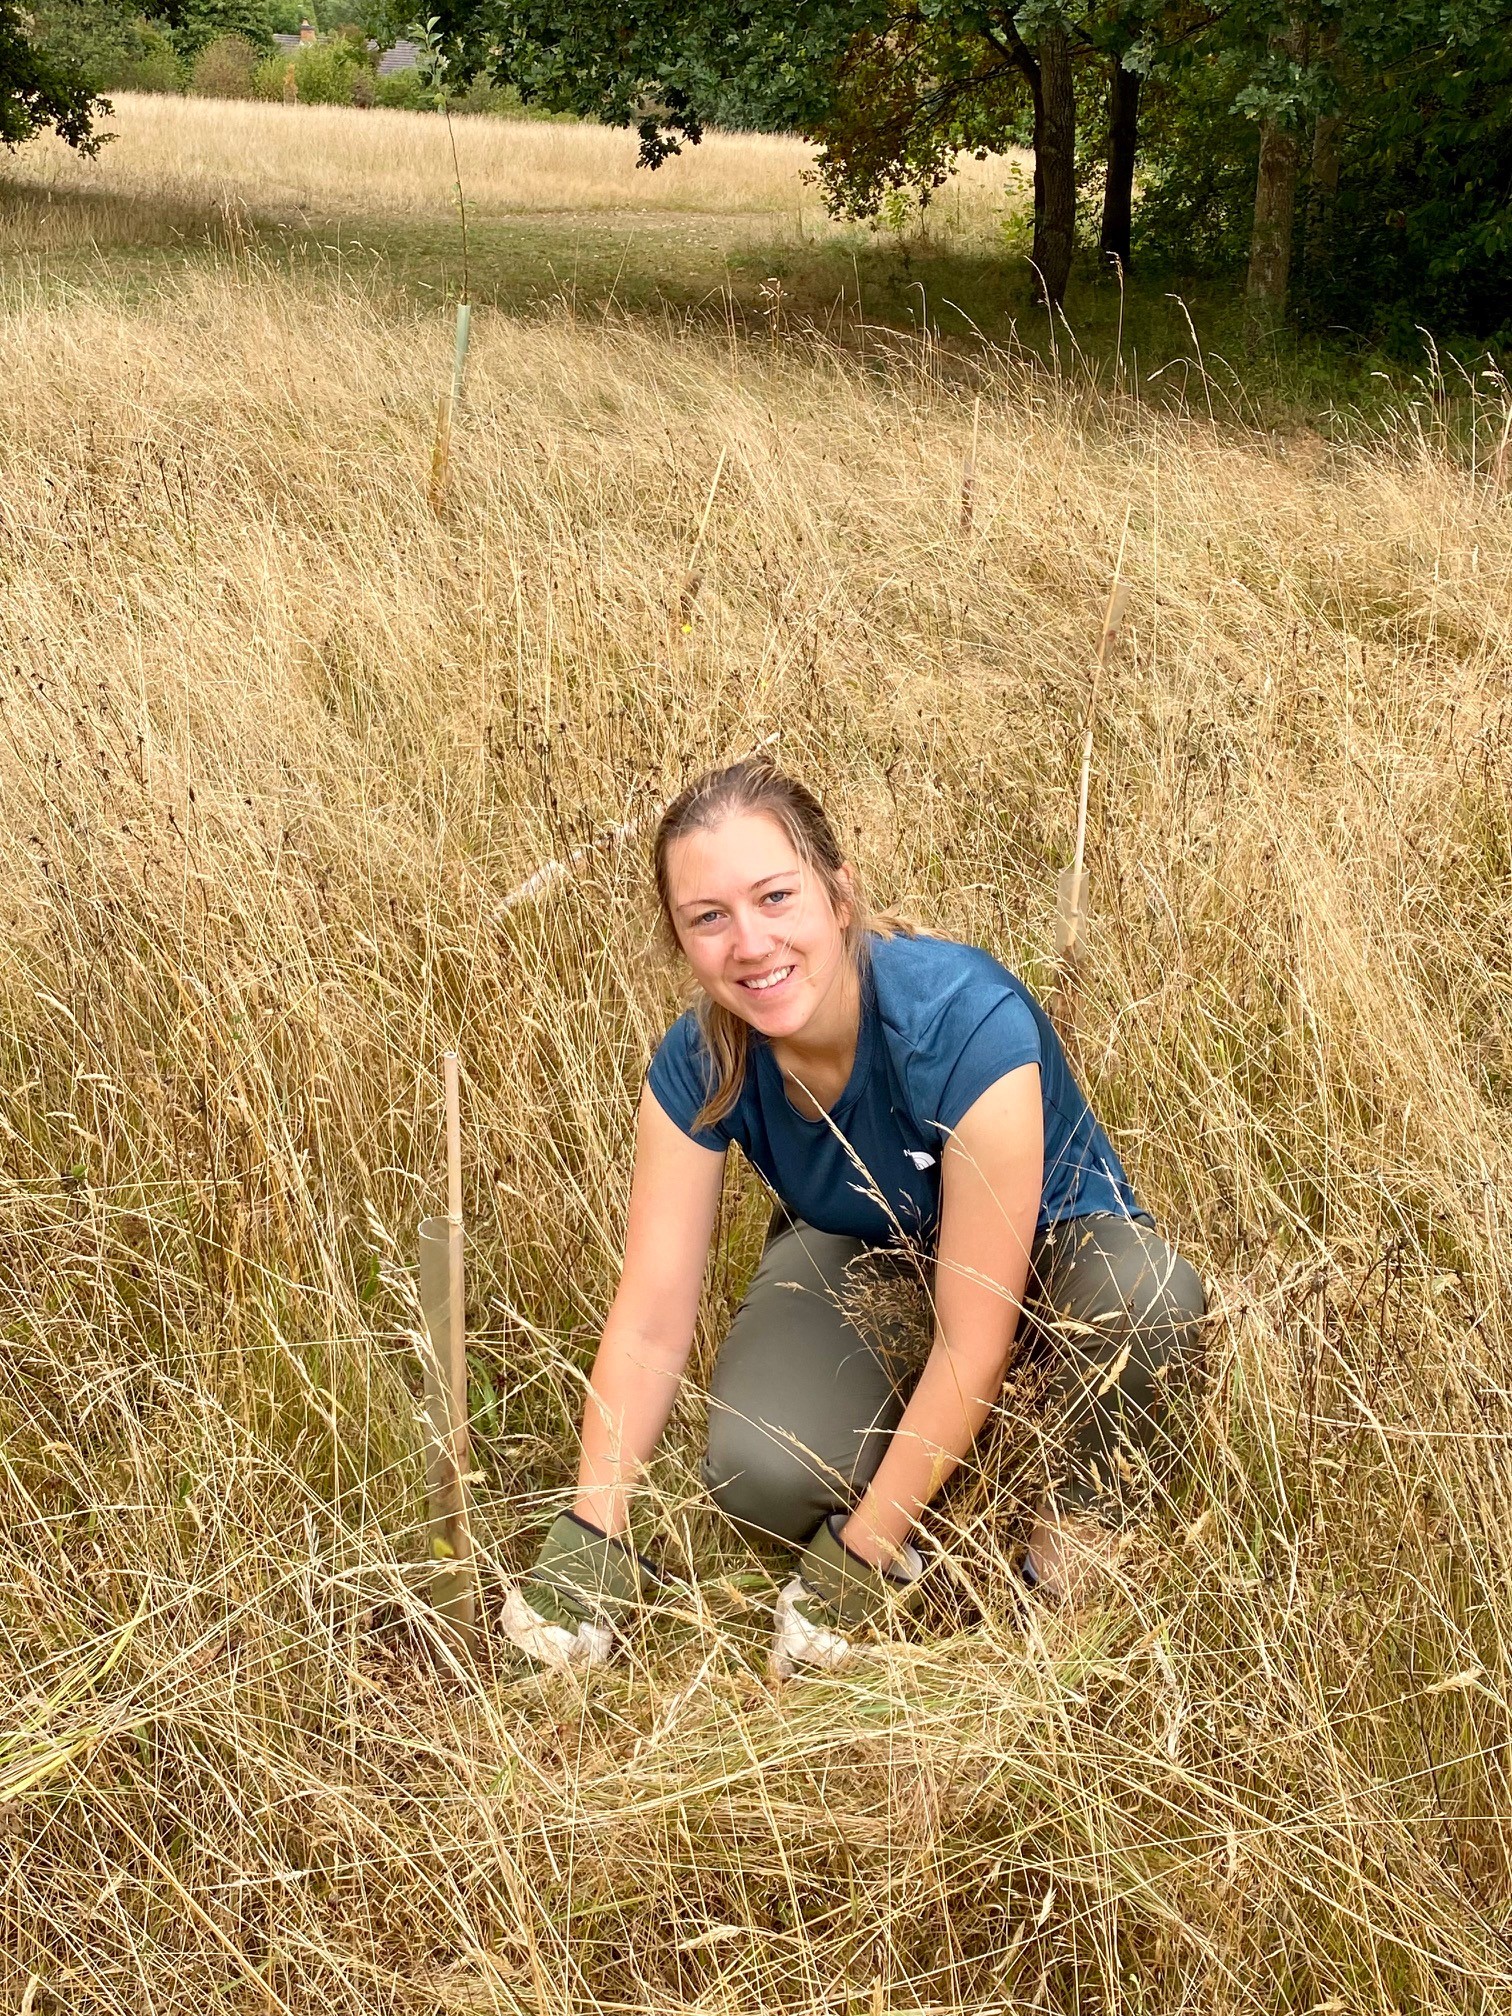 A young person with brown hair tied back in a ponytail smiles at the camera. They are crouching down in a field of tall, yellowing grass, beside a tree sapling. They are wearing a dark blue tshirt, khaki trousers, and green gardening gloves.